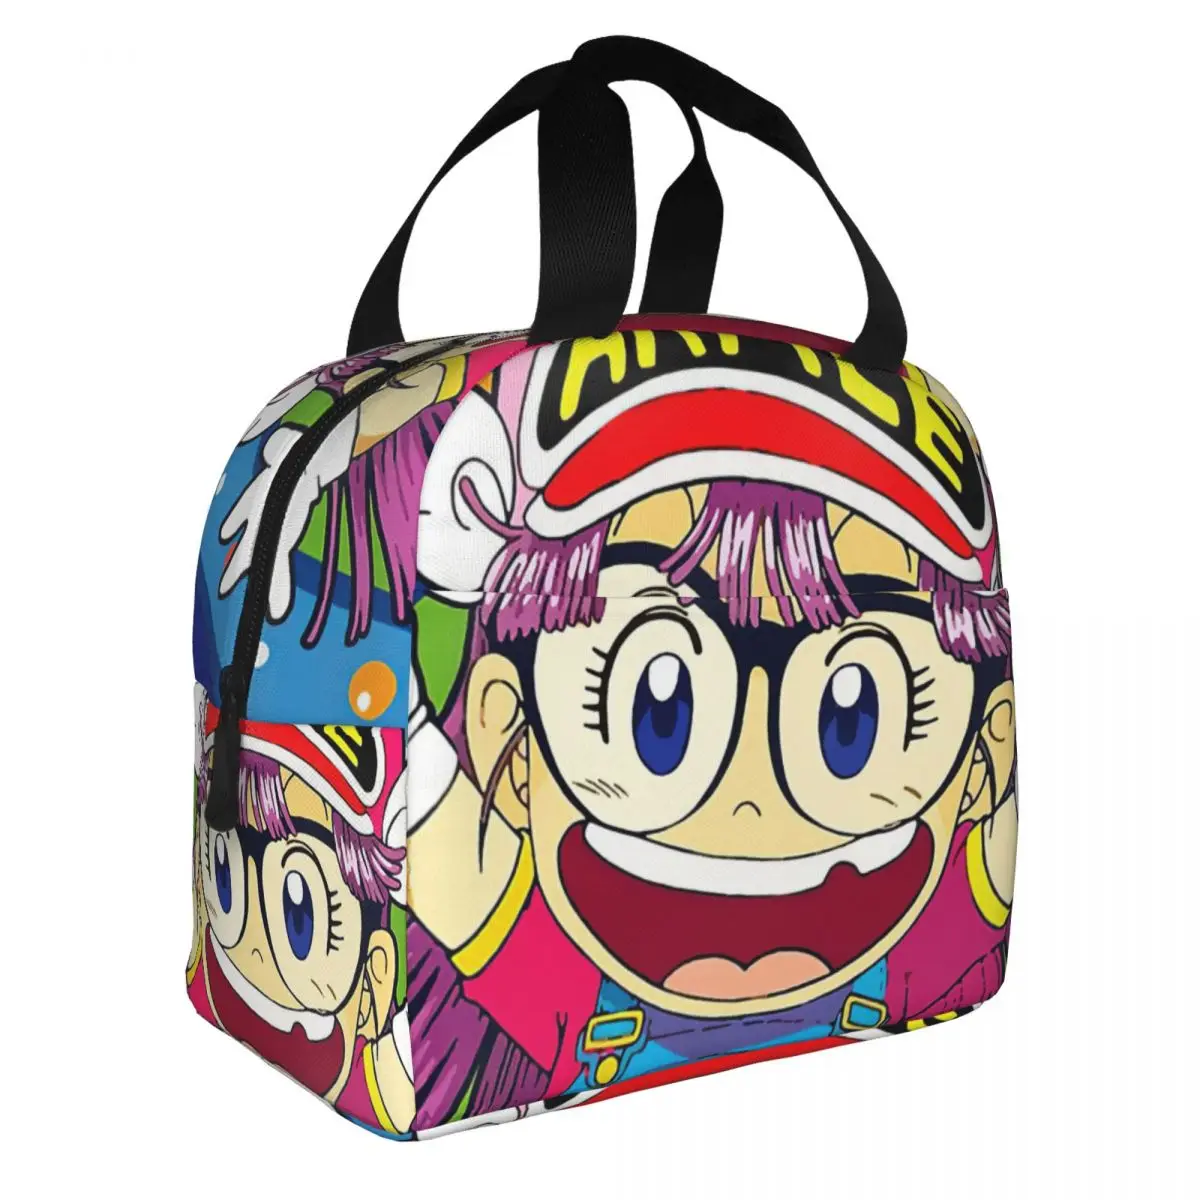 Dr. Slump Arale Lunch Bento Bags Portable Aluminum Foil thickened Thermal Cloth Lunch Bag for Women Men Boy